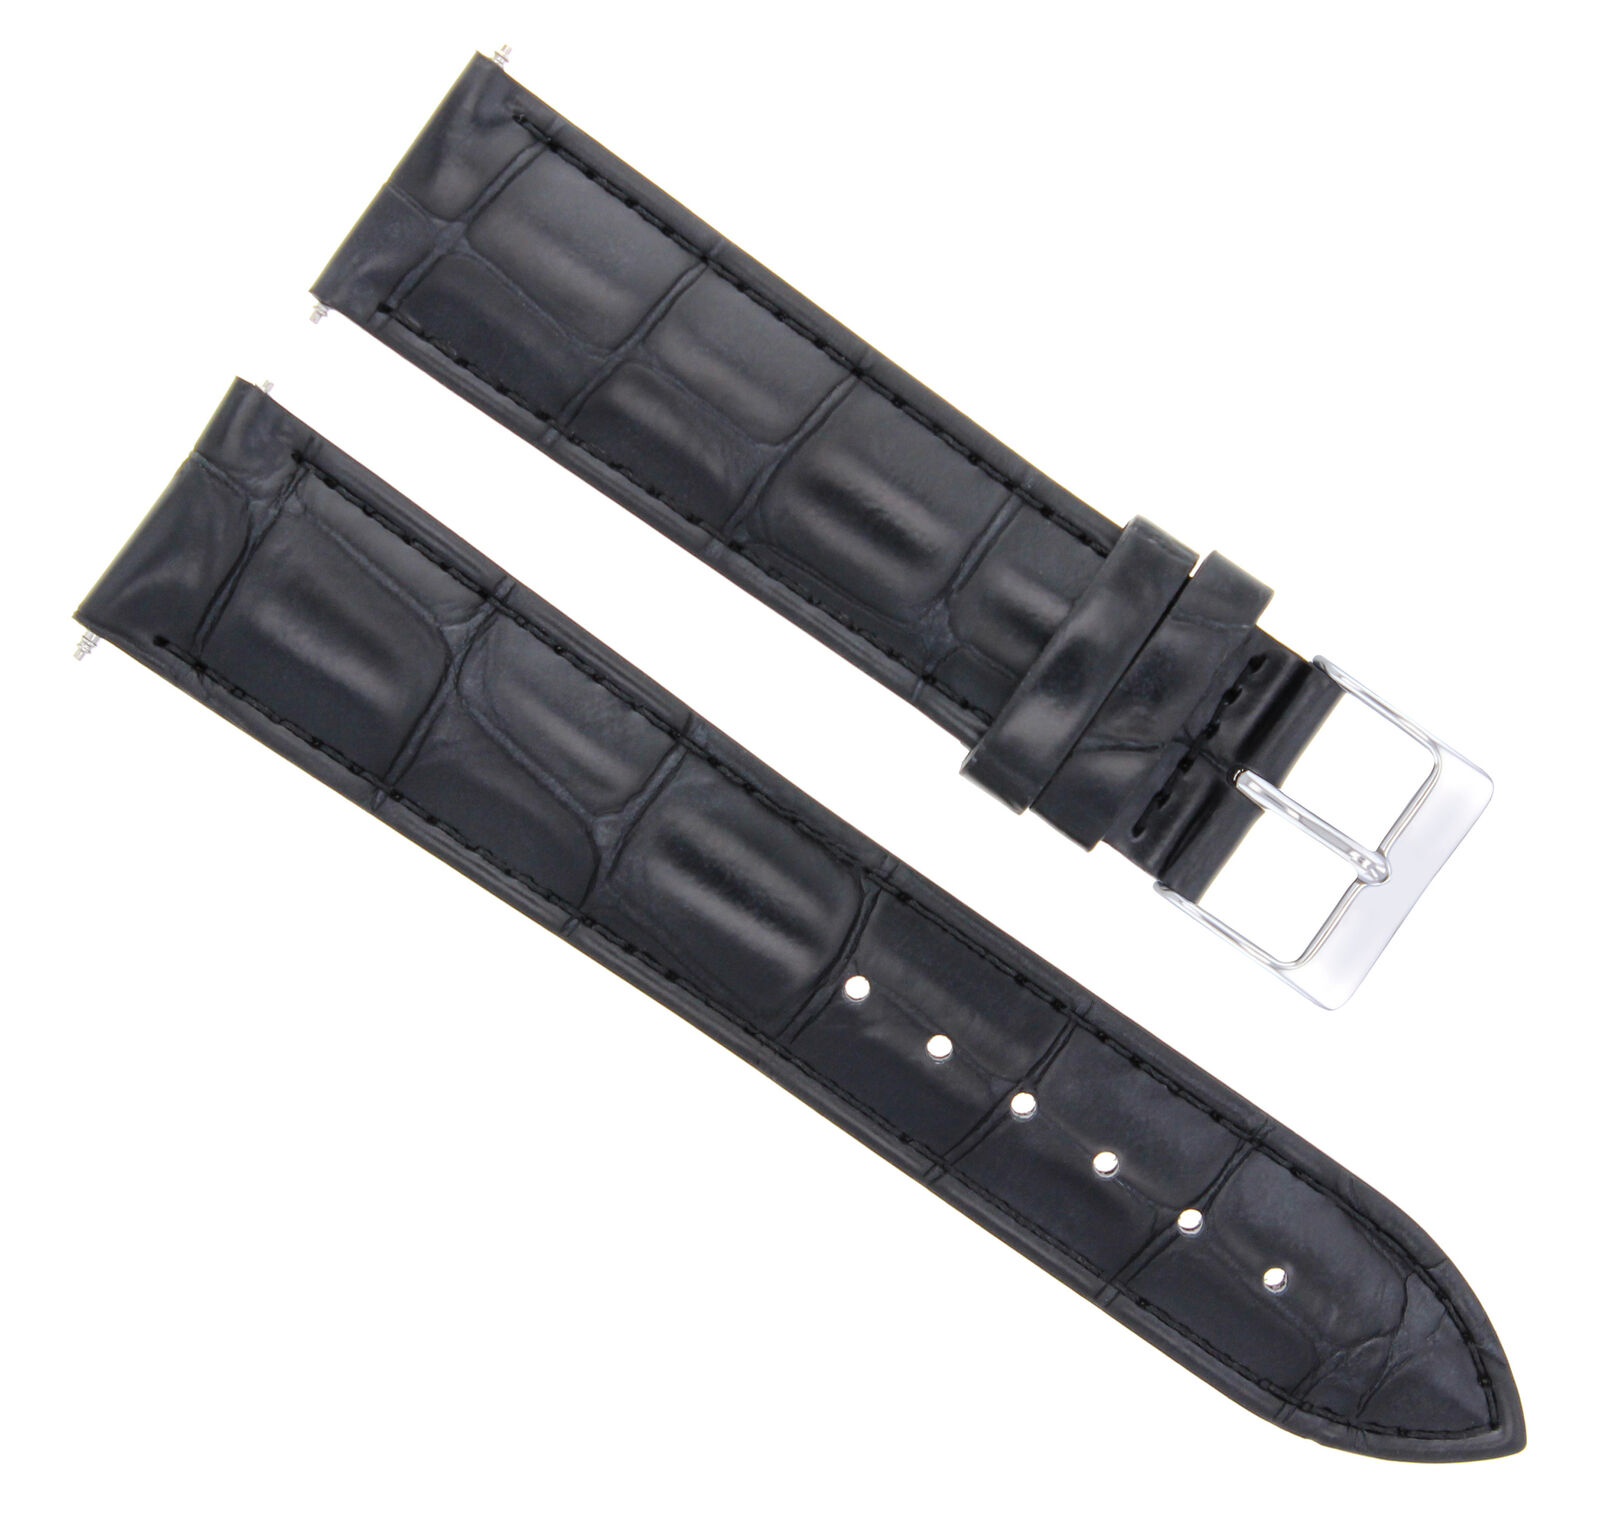 22MM GENUINE LEATHER BAND STRAP FOR VACHERON CONSTANTIN WATCH BLACK